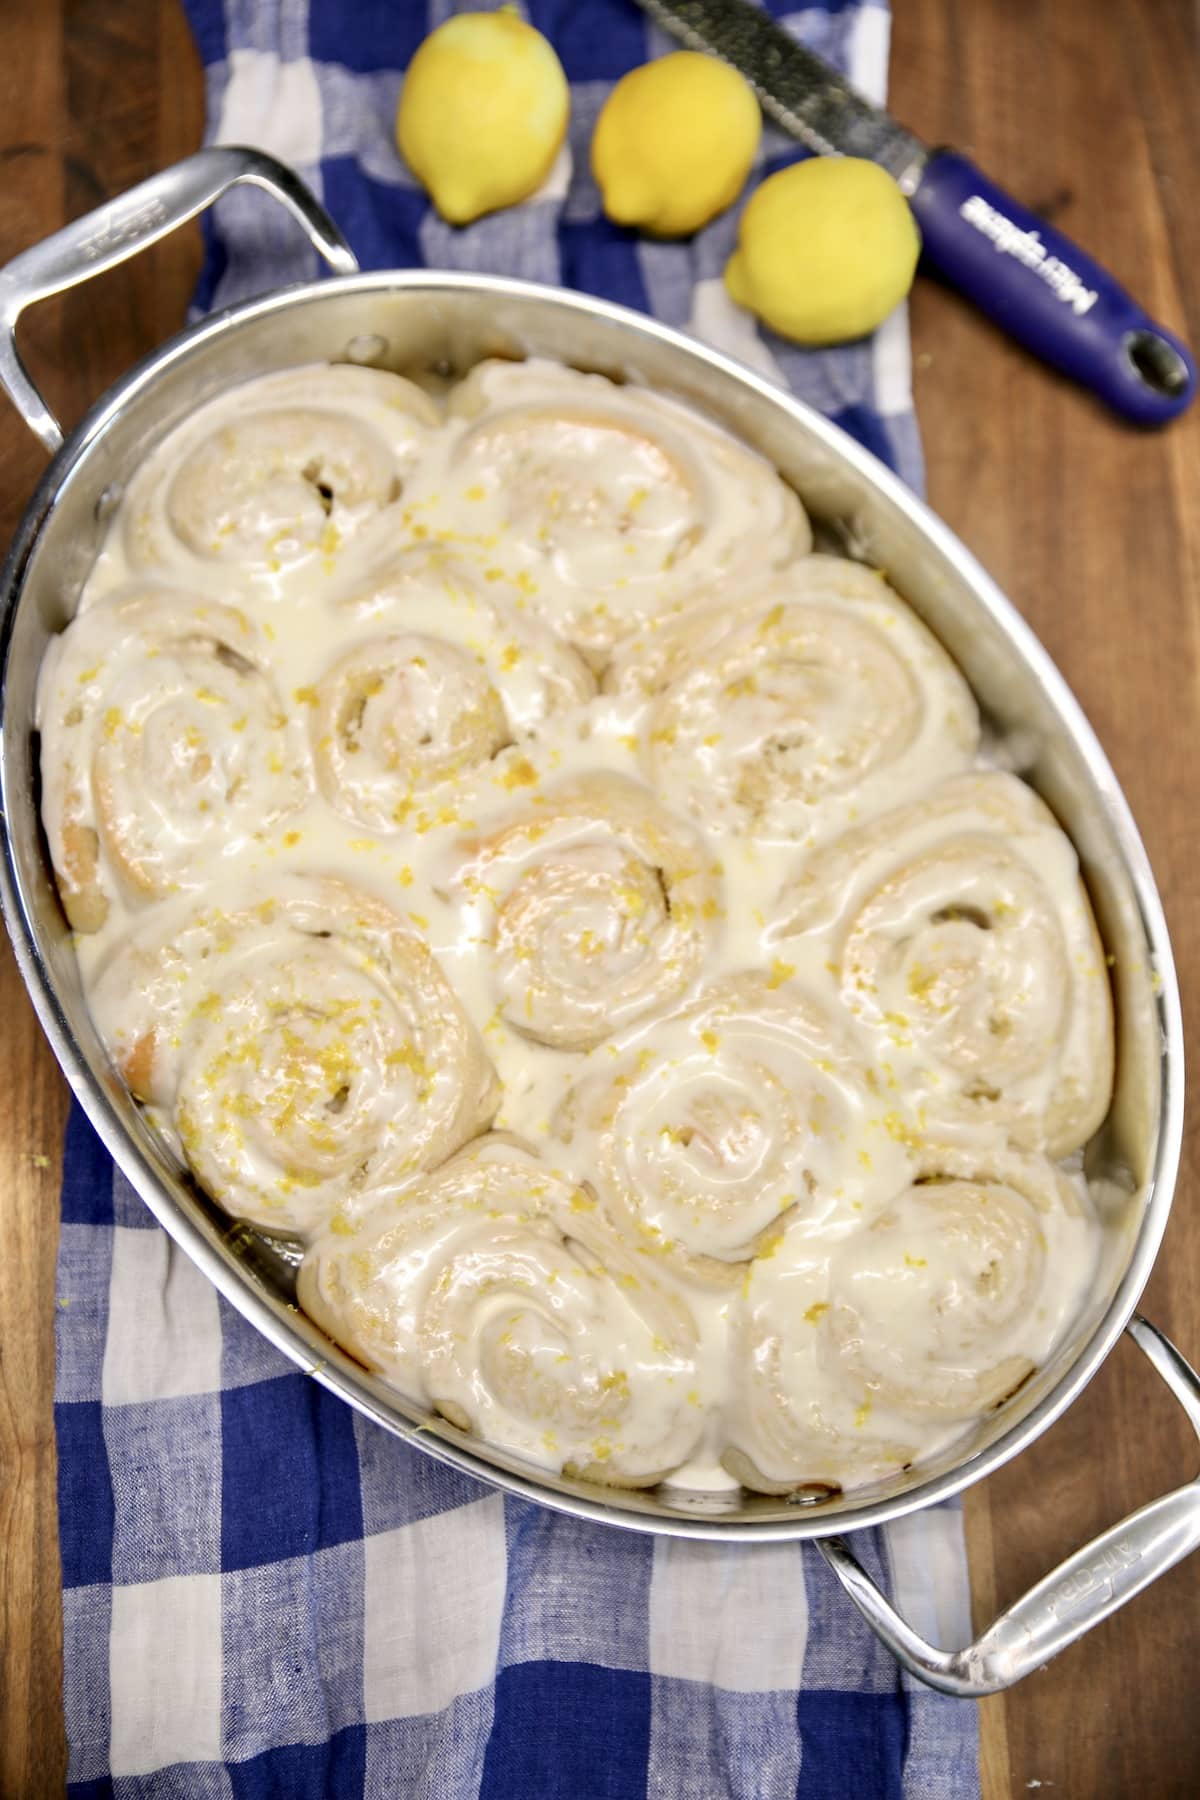 Lemon rolls with cream cheese icing in an oval pan.